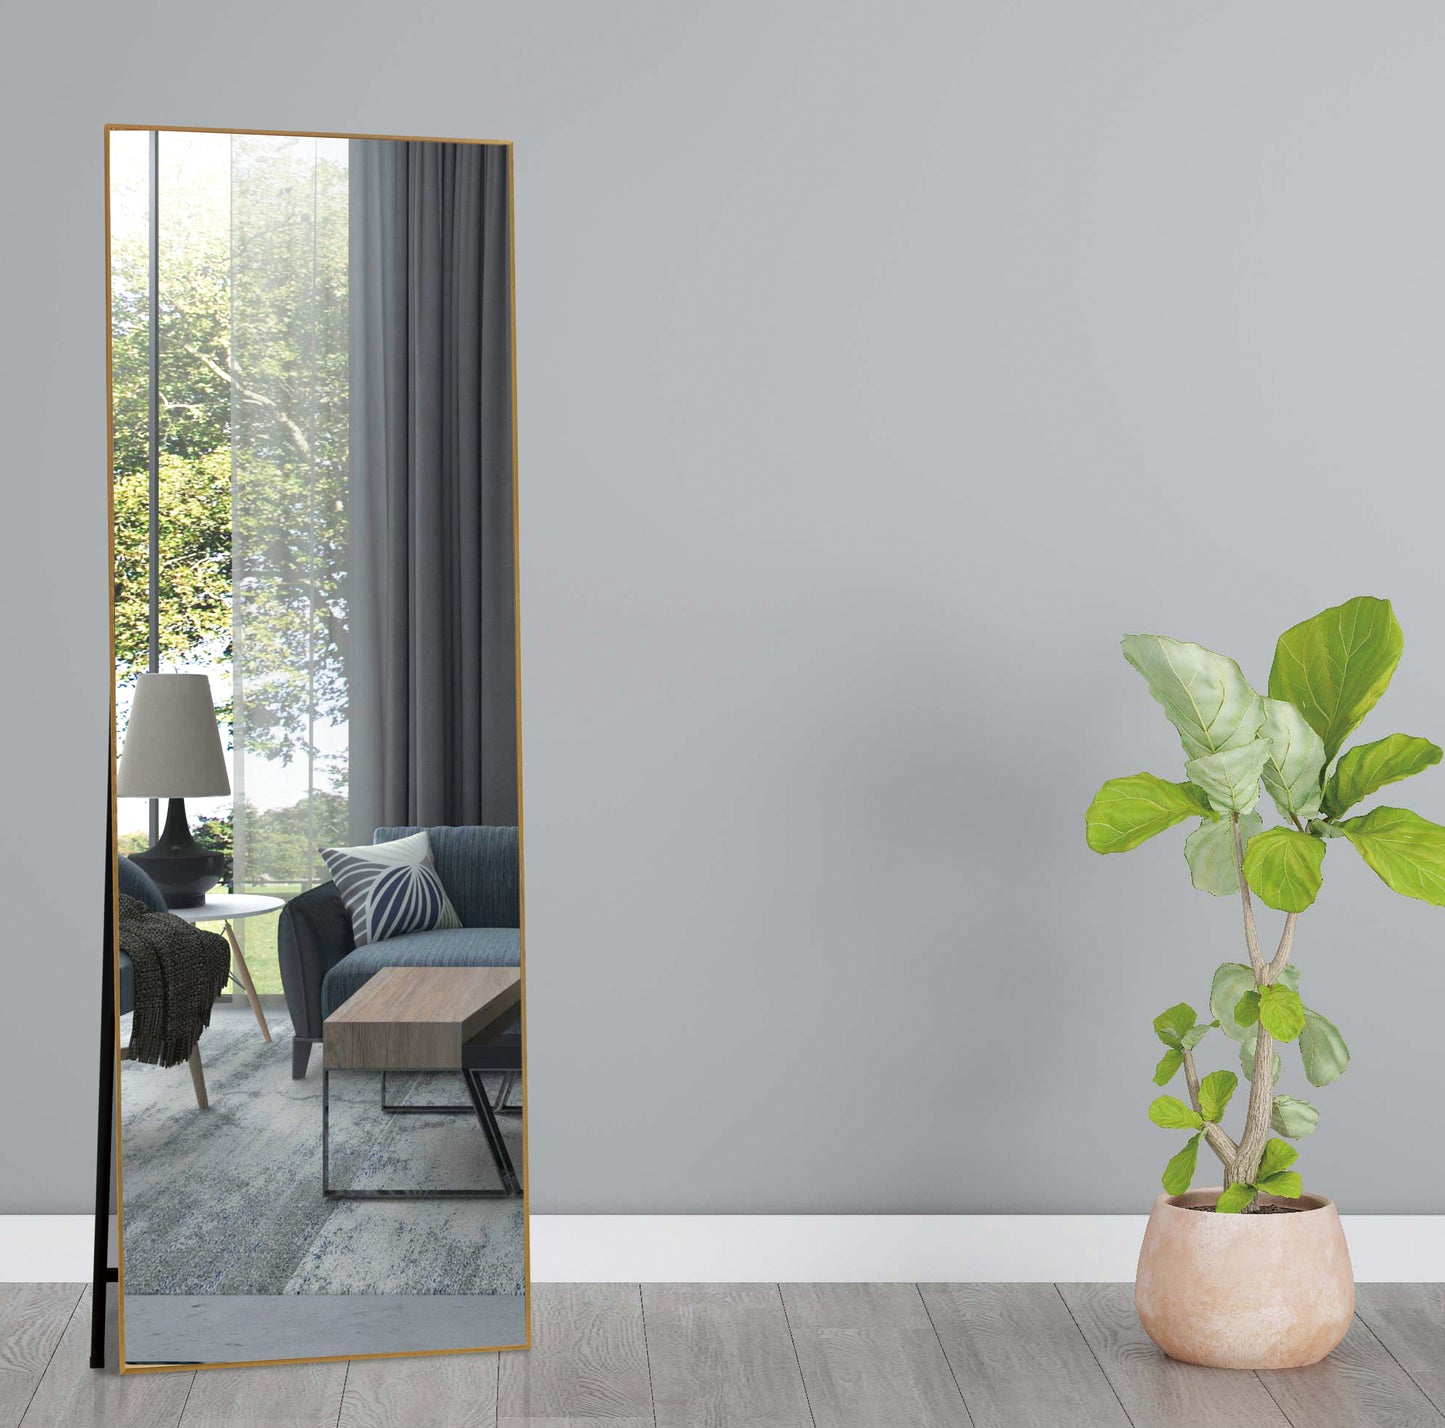 Gold 65 x 22 In Metal Stand full-length mirror